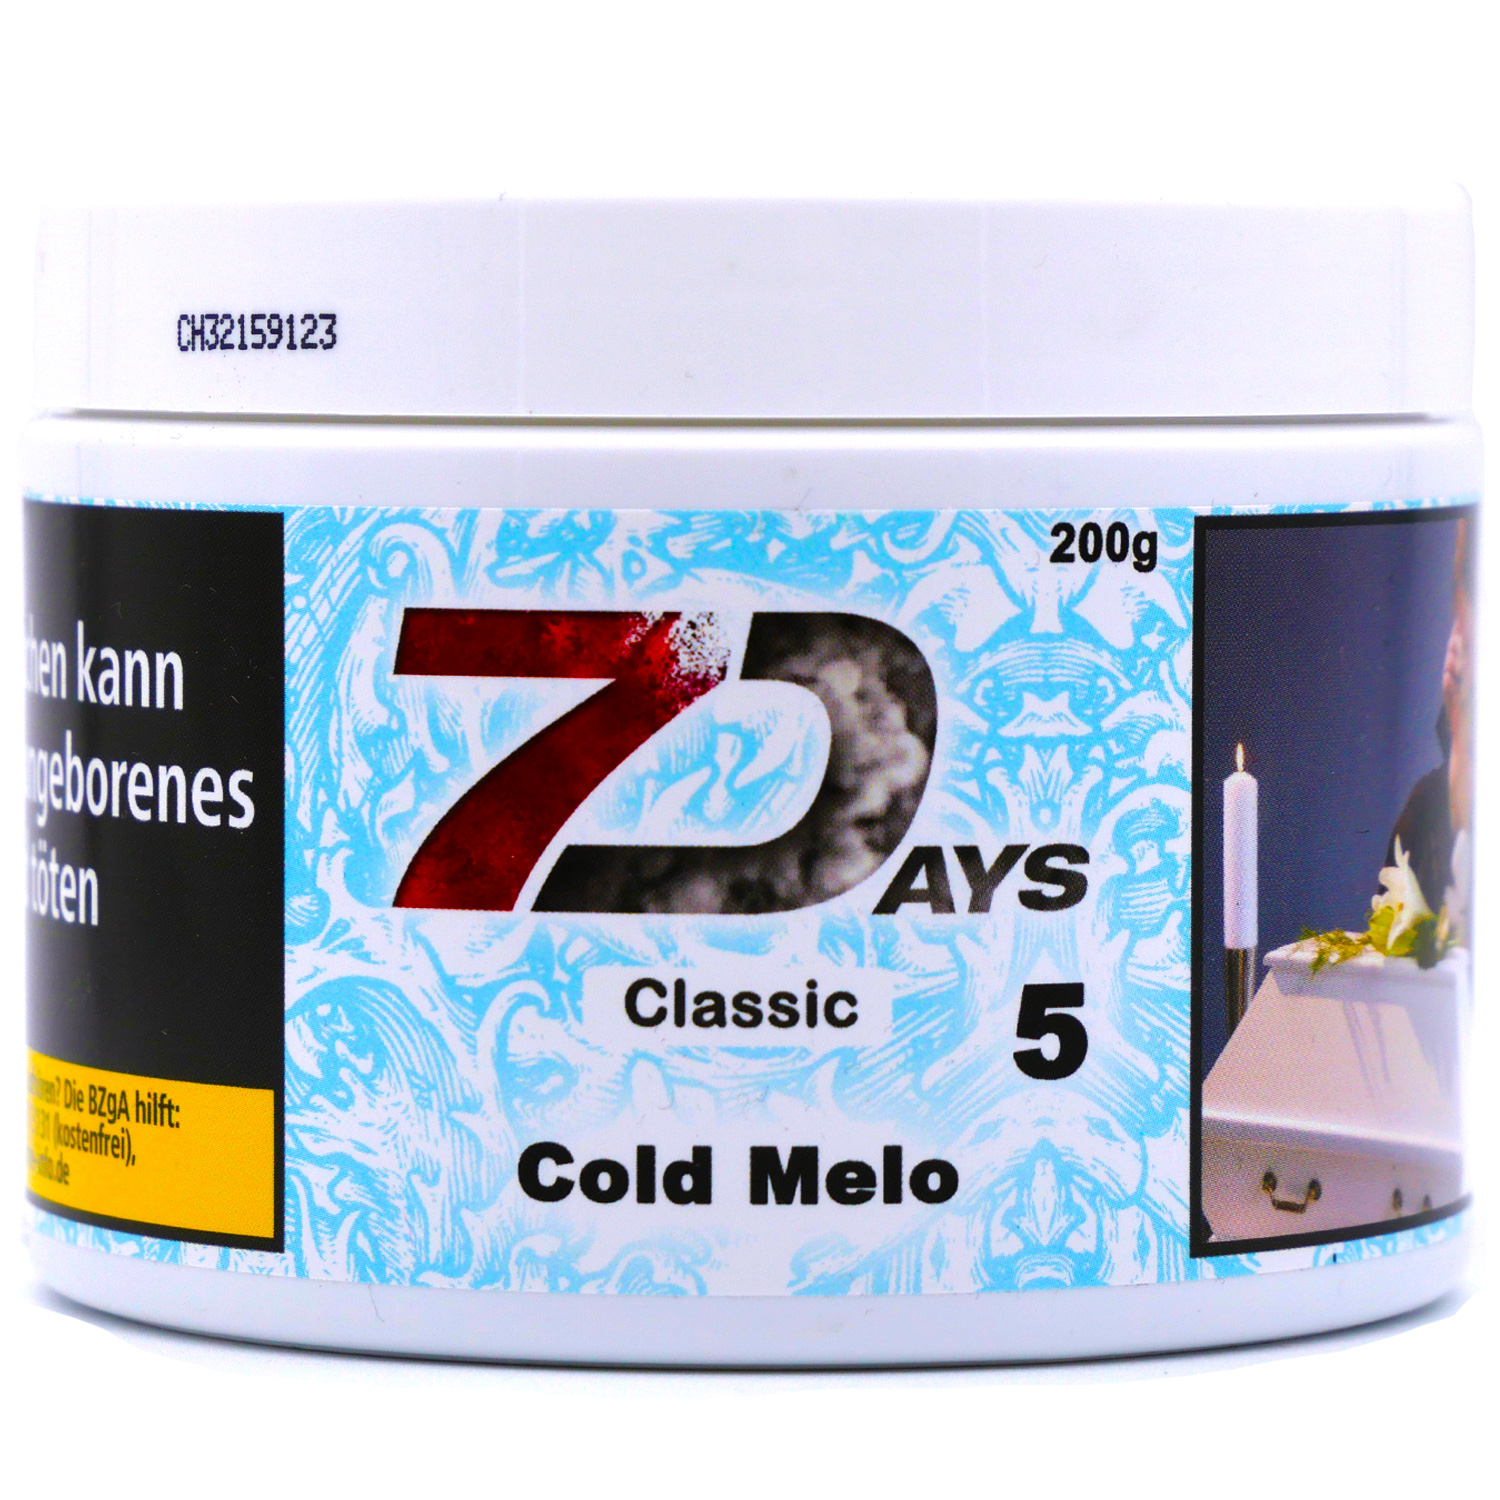 7 Days Classic | Cold Melo | 200g